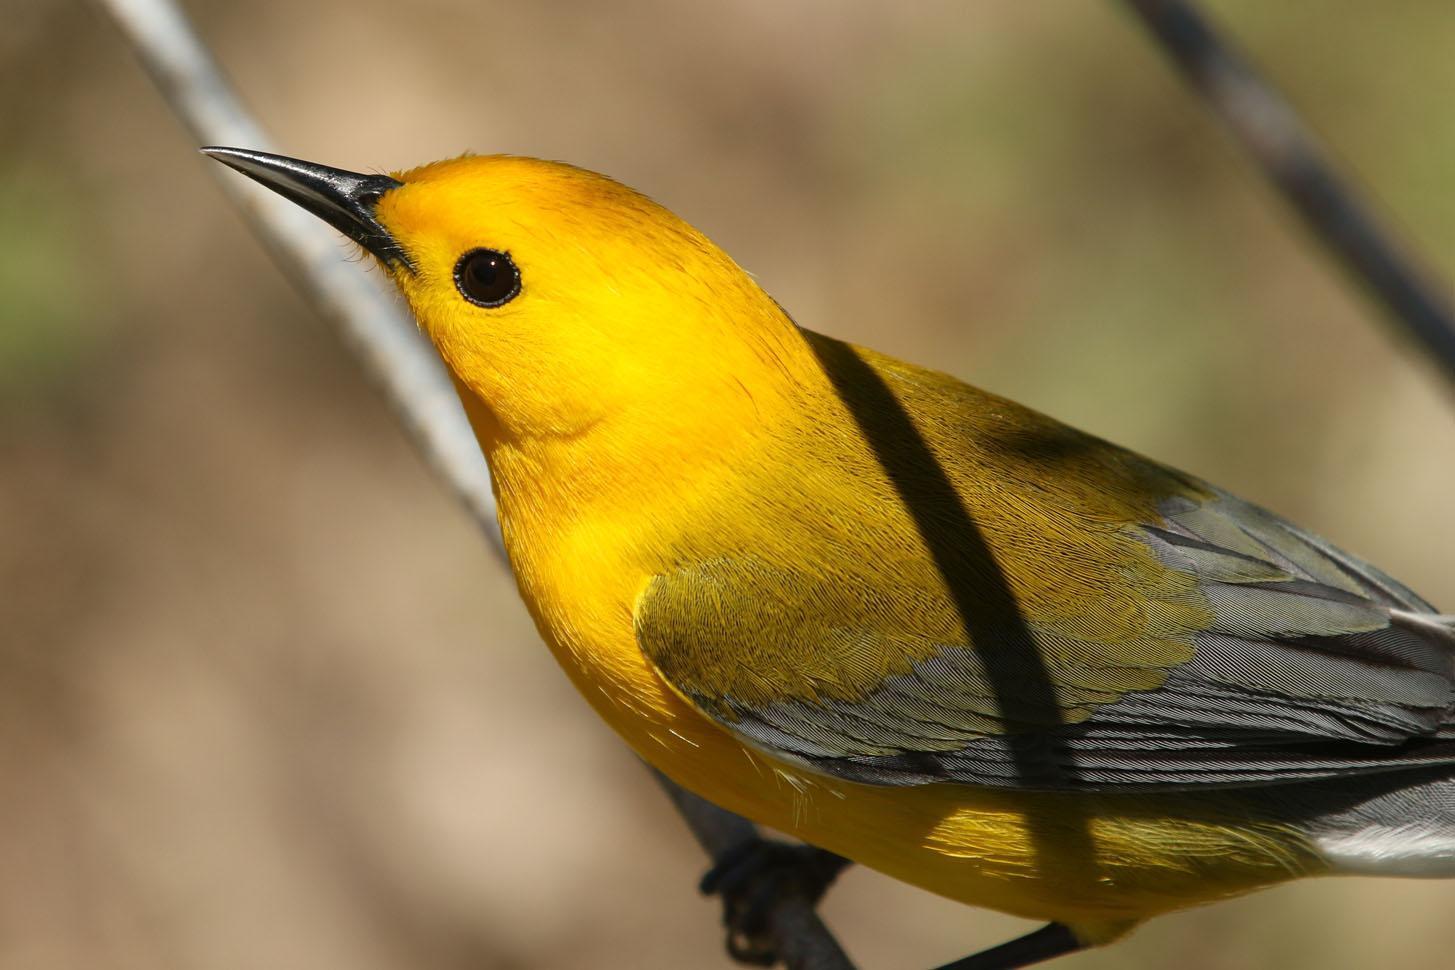 Prothonotary Warbler Photo by Kristy Baker